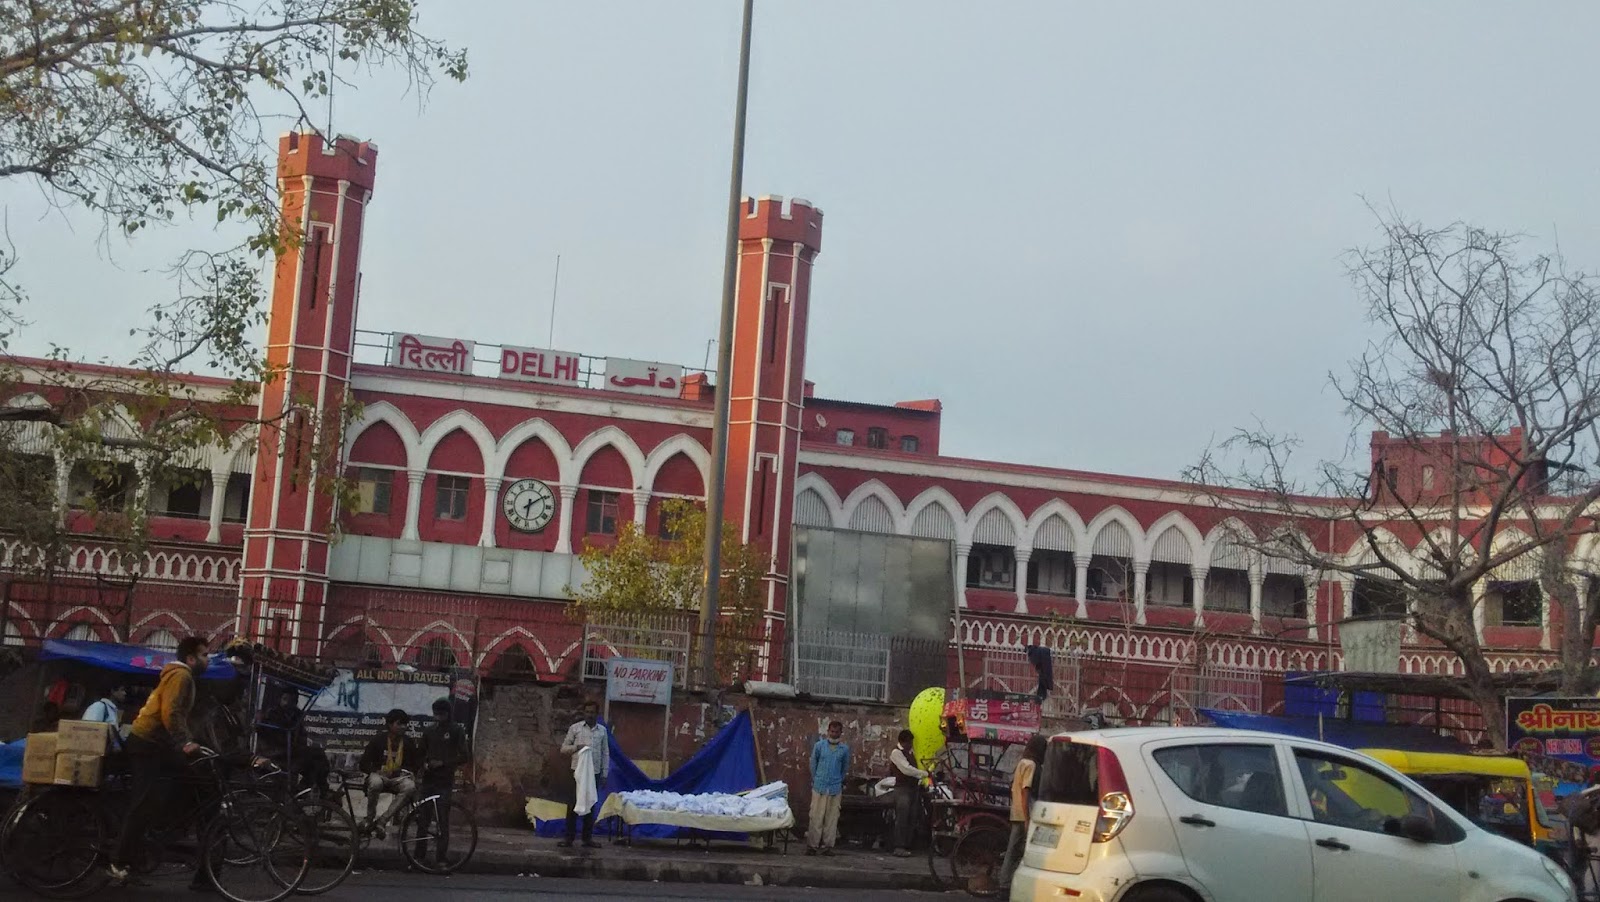 KNOWEB: CHARMING OLD DELHI RAILWAY STATION AND ITS SURROUNDINGS